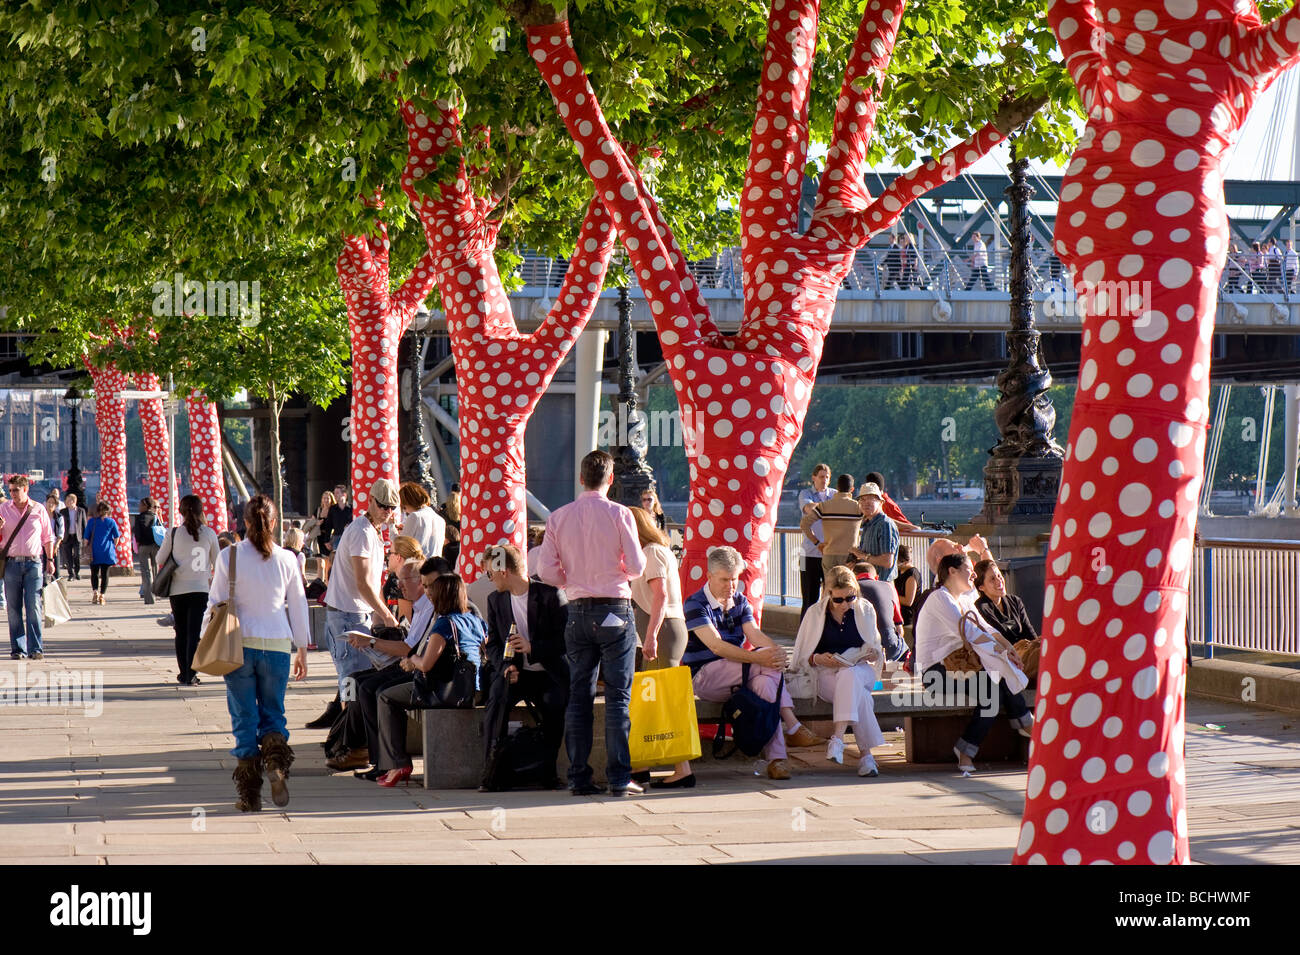 Trees covered in polka dots to celebrate exhibition by Yayoi Kusama at Hayward Gallery Southbank Centre London United Kingdom Stock Photo